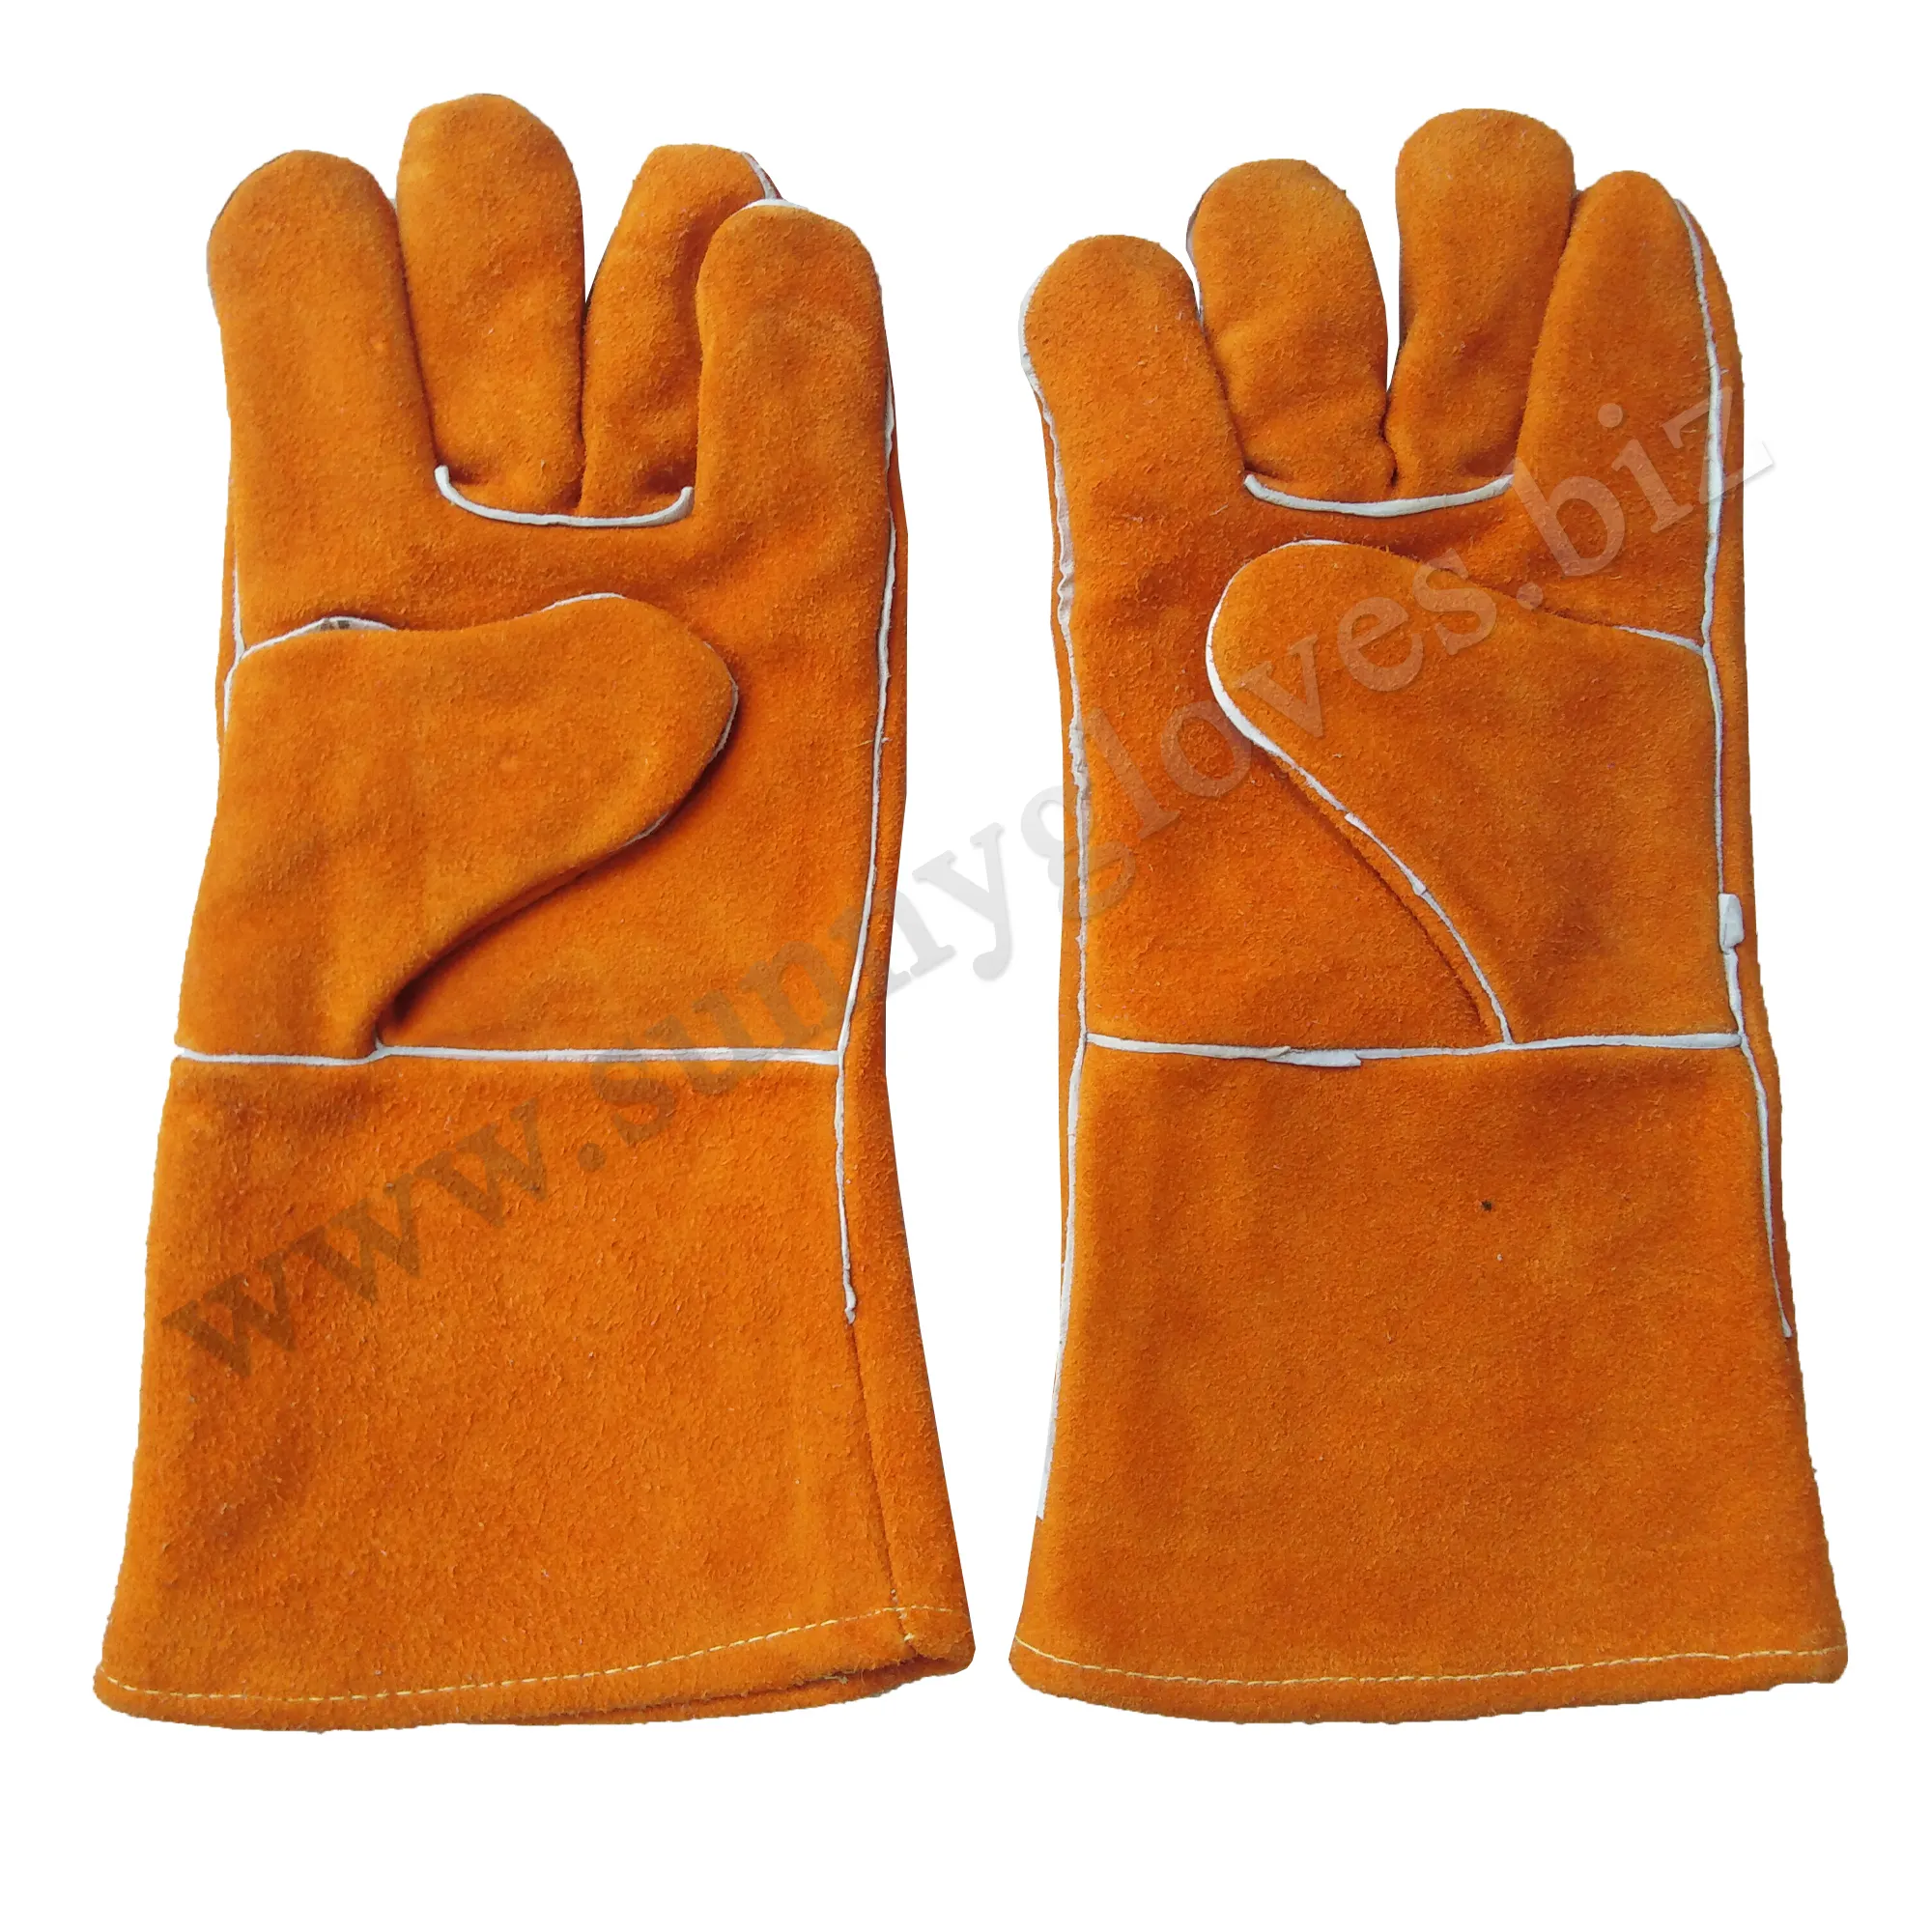 Palm Made Front Back With Crust Grain Goatskin Leather Breathability & Comfort Cowhide Split Leather Long Cuffs Welding Gloves